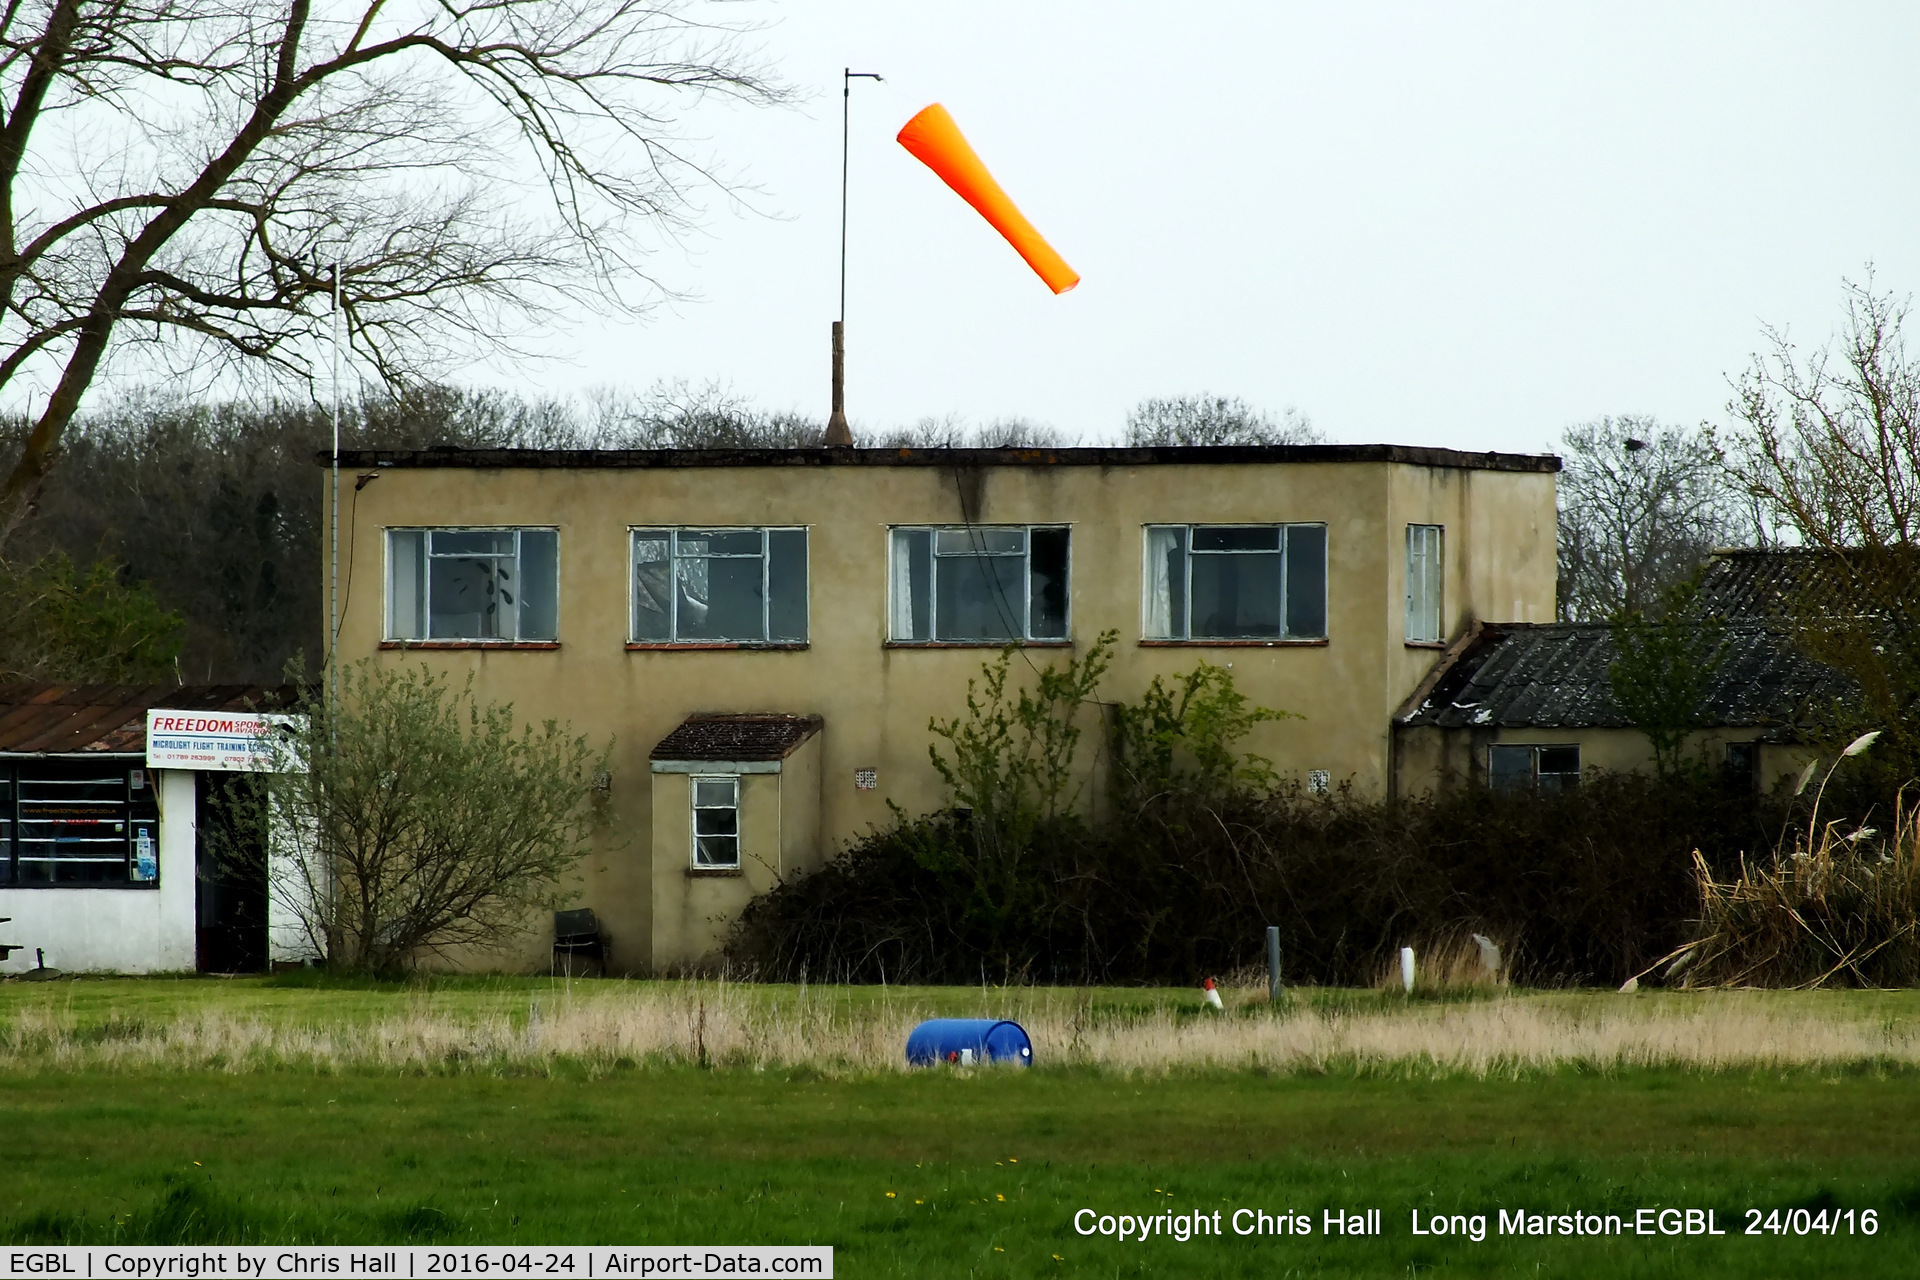 EGBL Airport - former WWII tower at Long Marston now used by one of the flying clubs